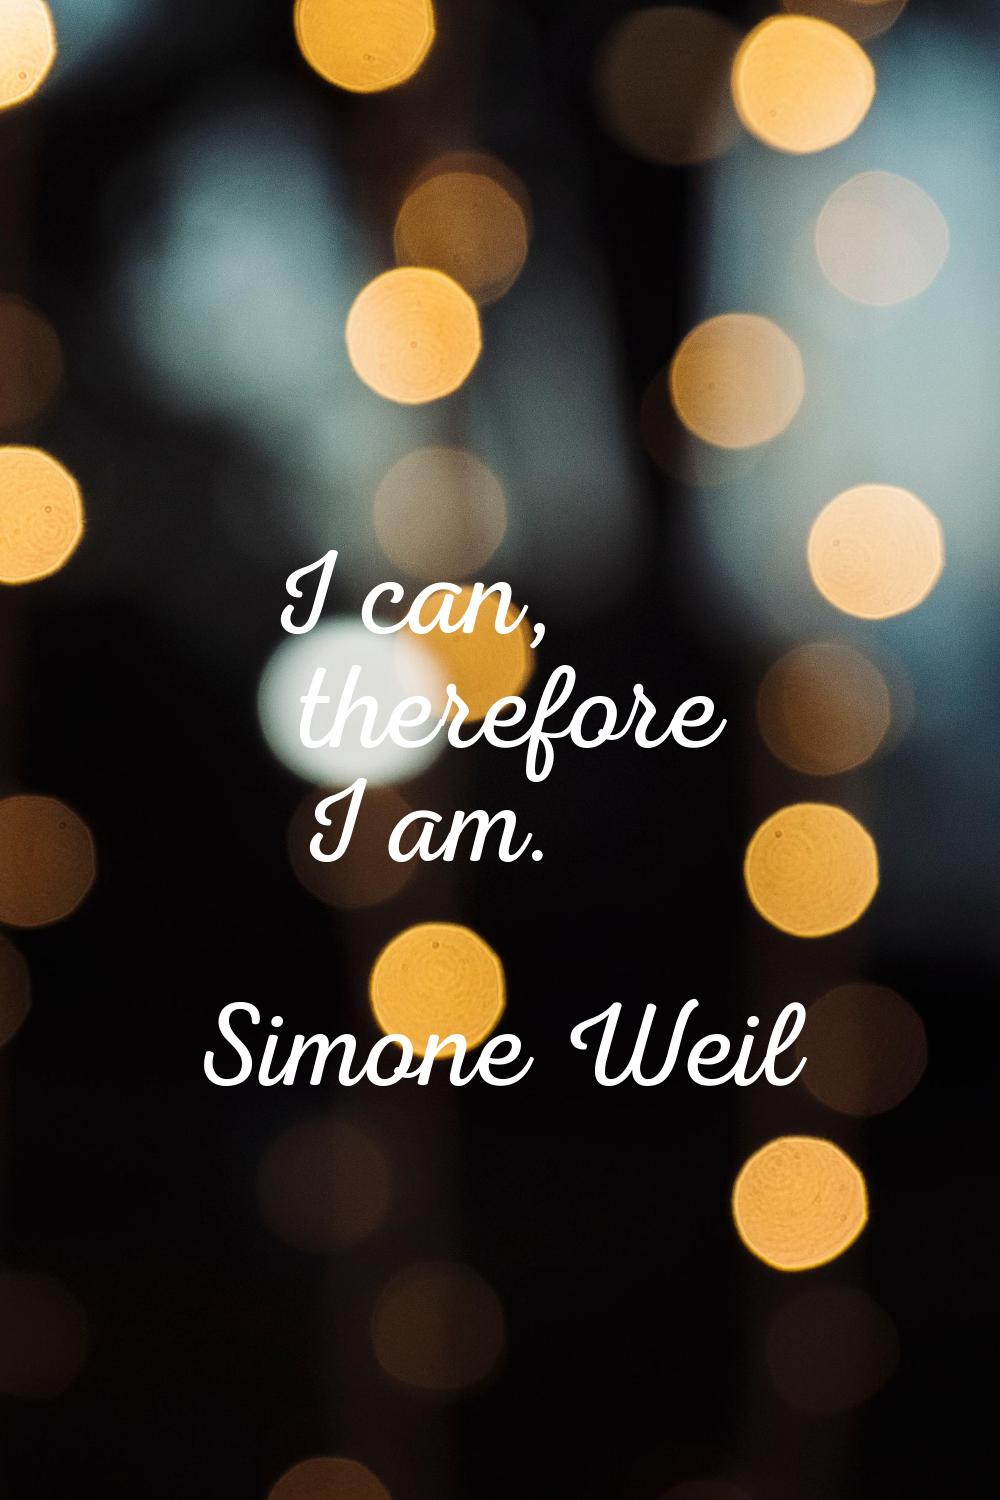 I can, therefore I am.